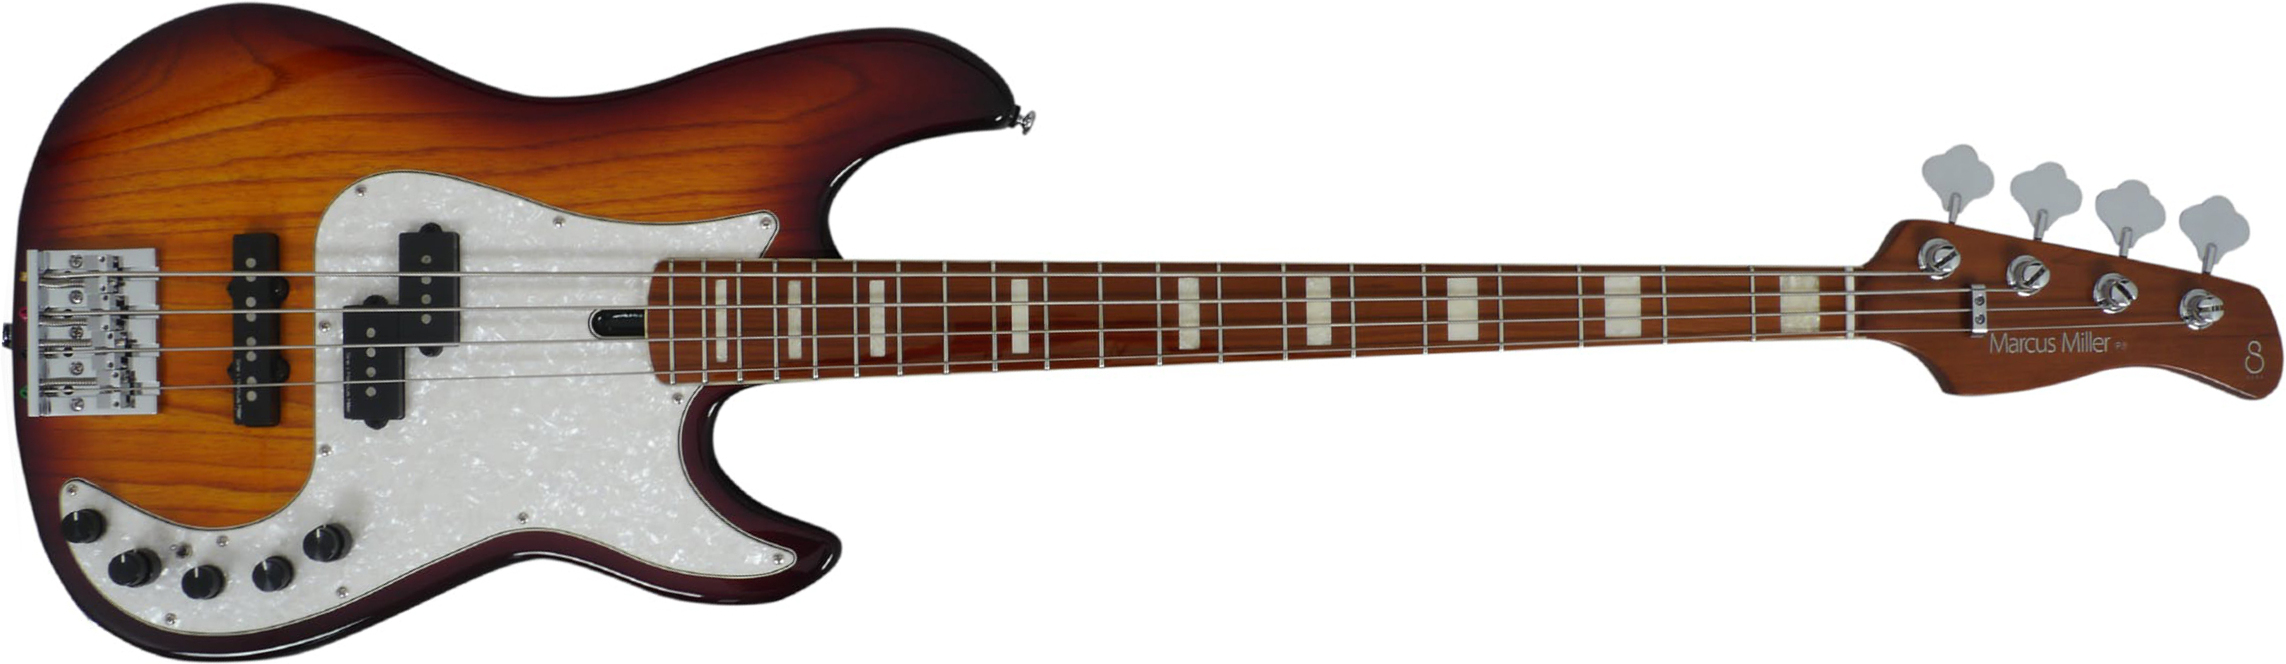 Marcus Miller P8 4st Active Mn - Tobacco Sunburst - Solid body electric bass - Main picture